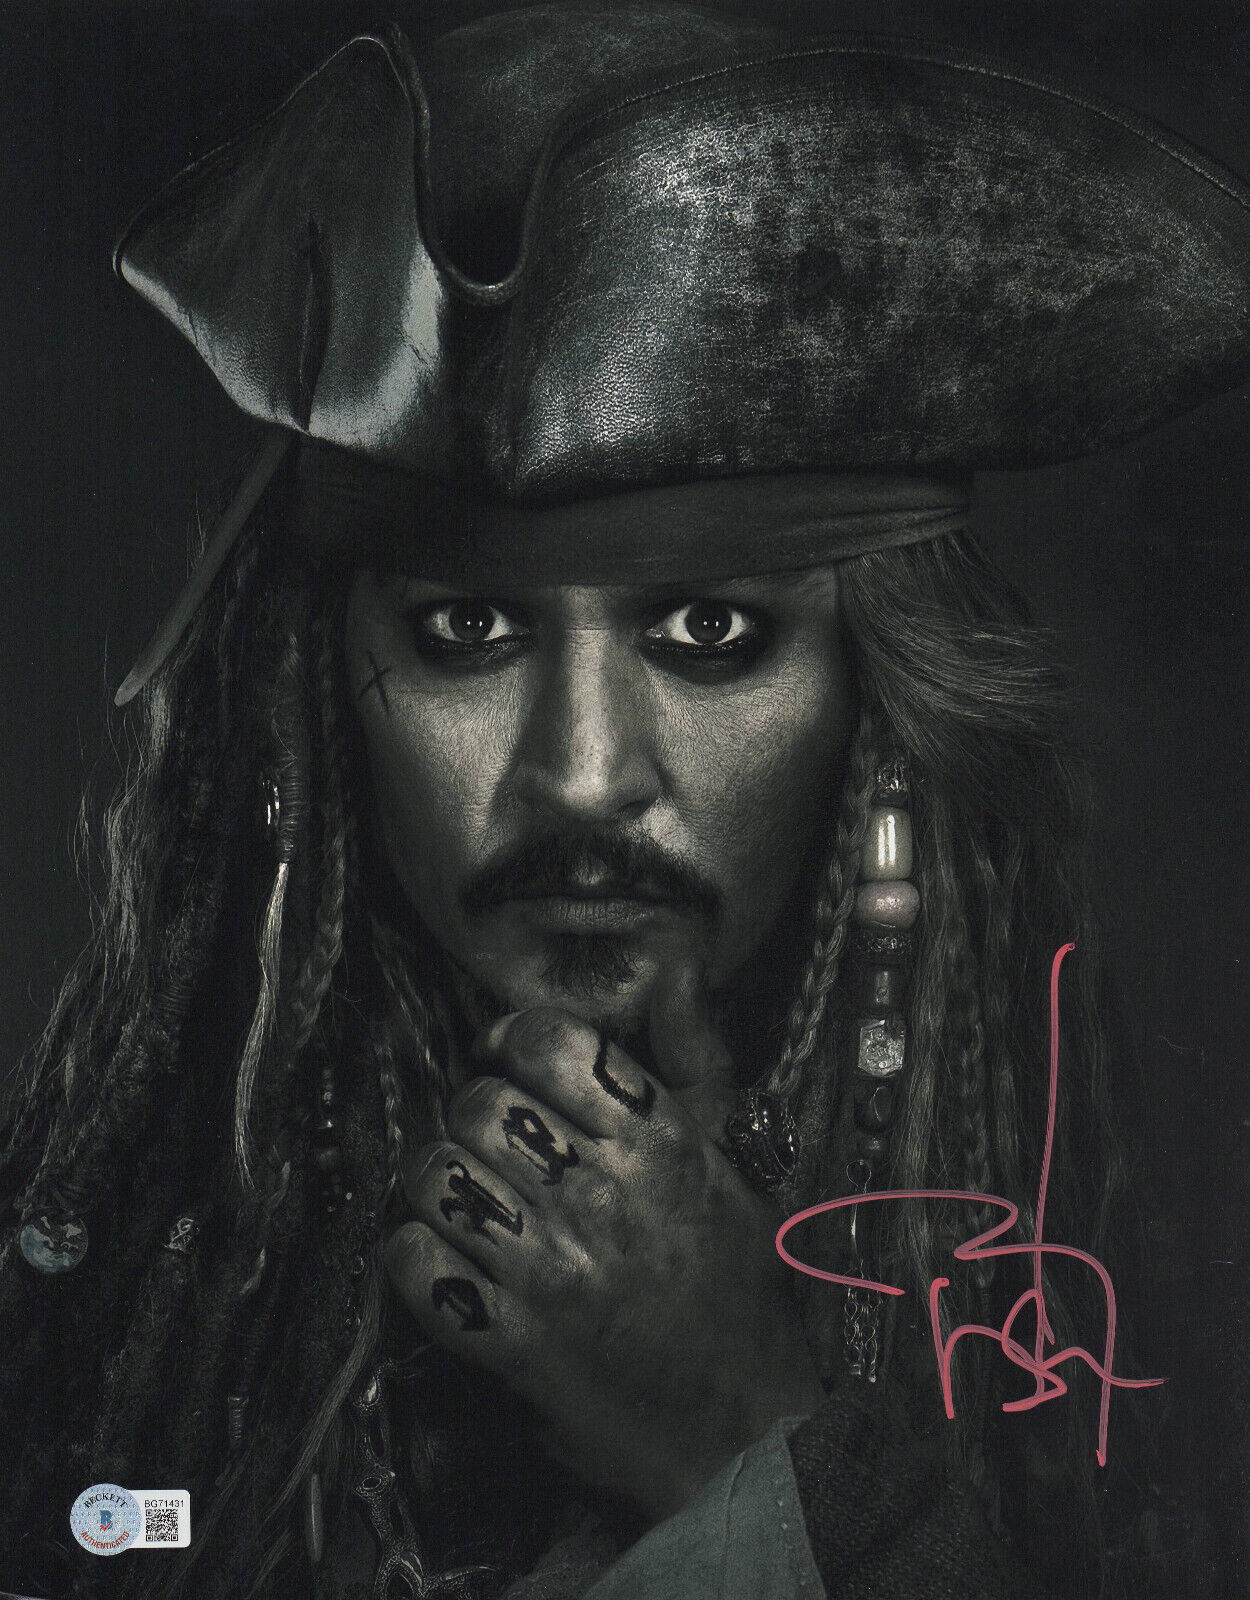 JOHNNY DEPP SIGNED \'PIRATES OF THE CARIBBEAN\' 11X14 PHOTO AUTOGRAPH BECKETT